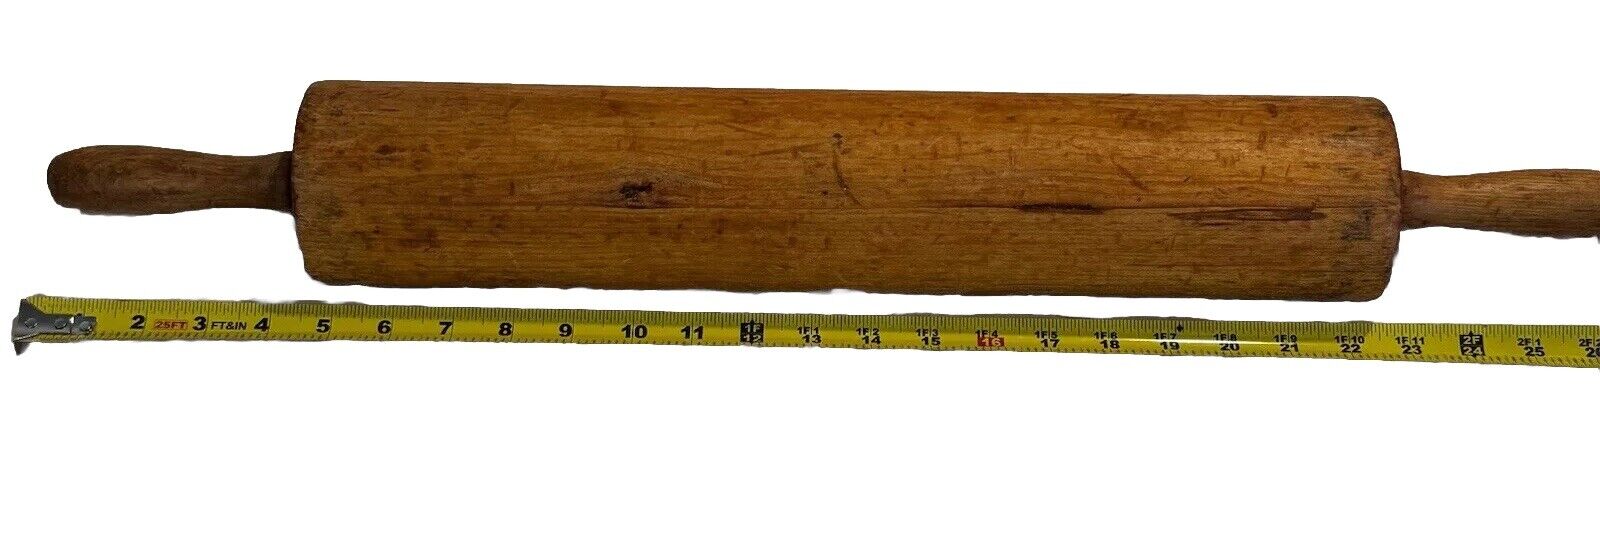 ANTIQUE PRIMITIVE COUNTRY FARM SOLID CARVED MAPLE WOOD KITCHEN DOUGH ROLLING PIN